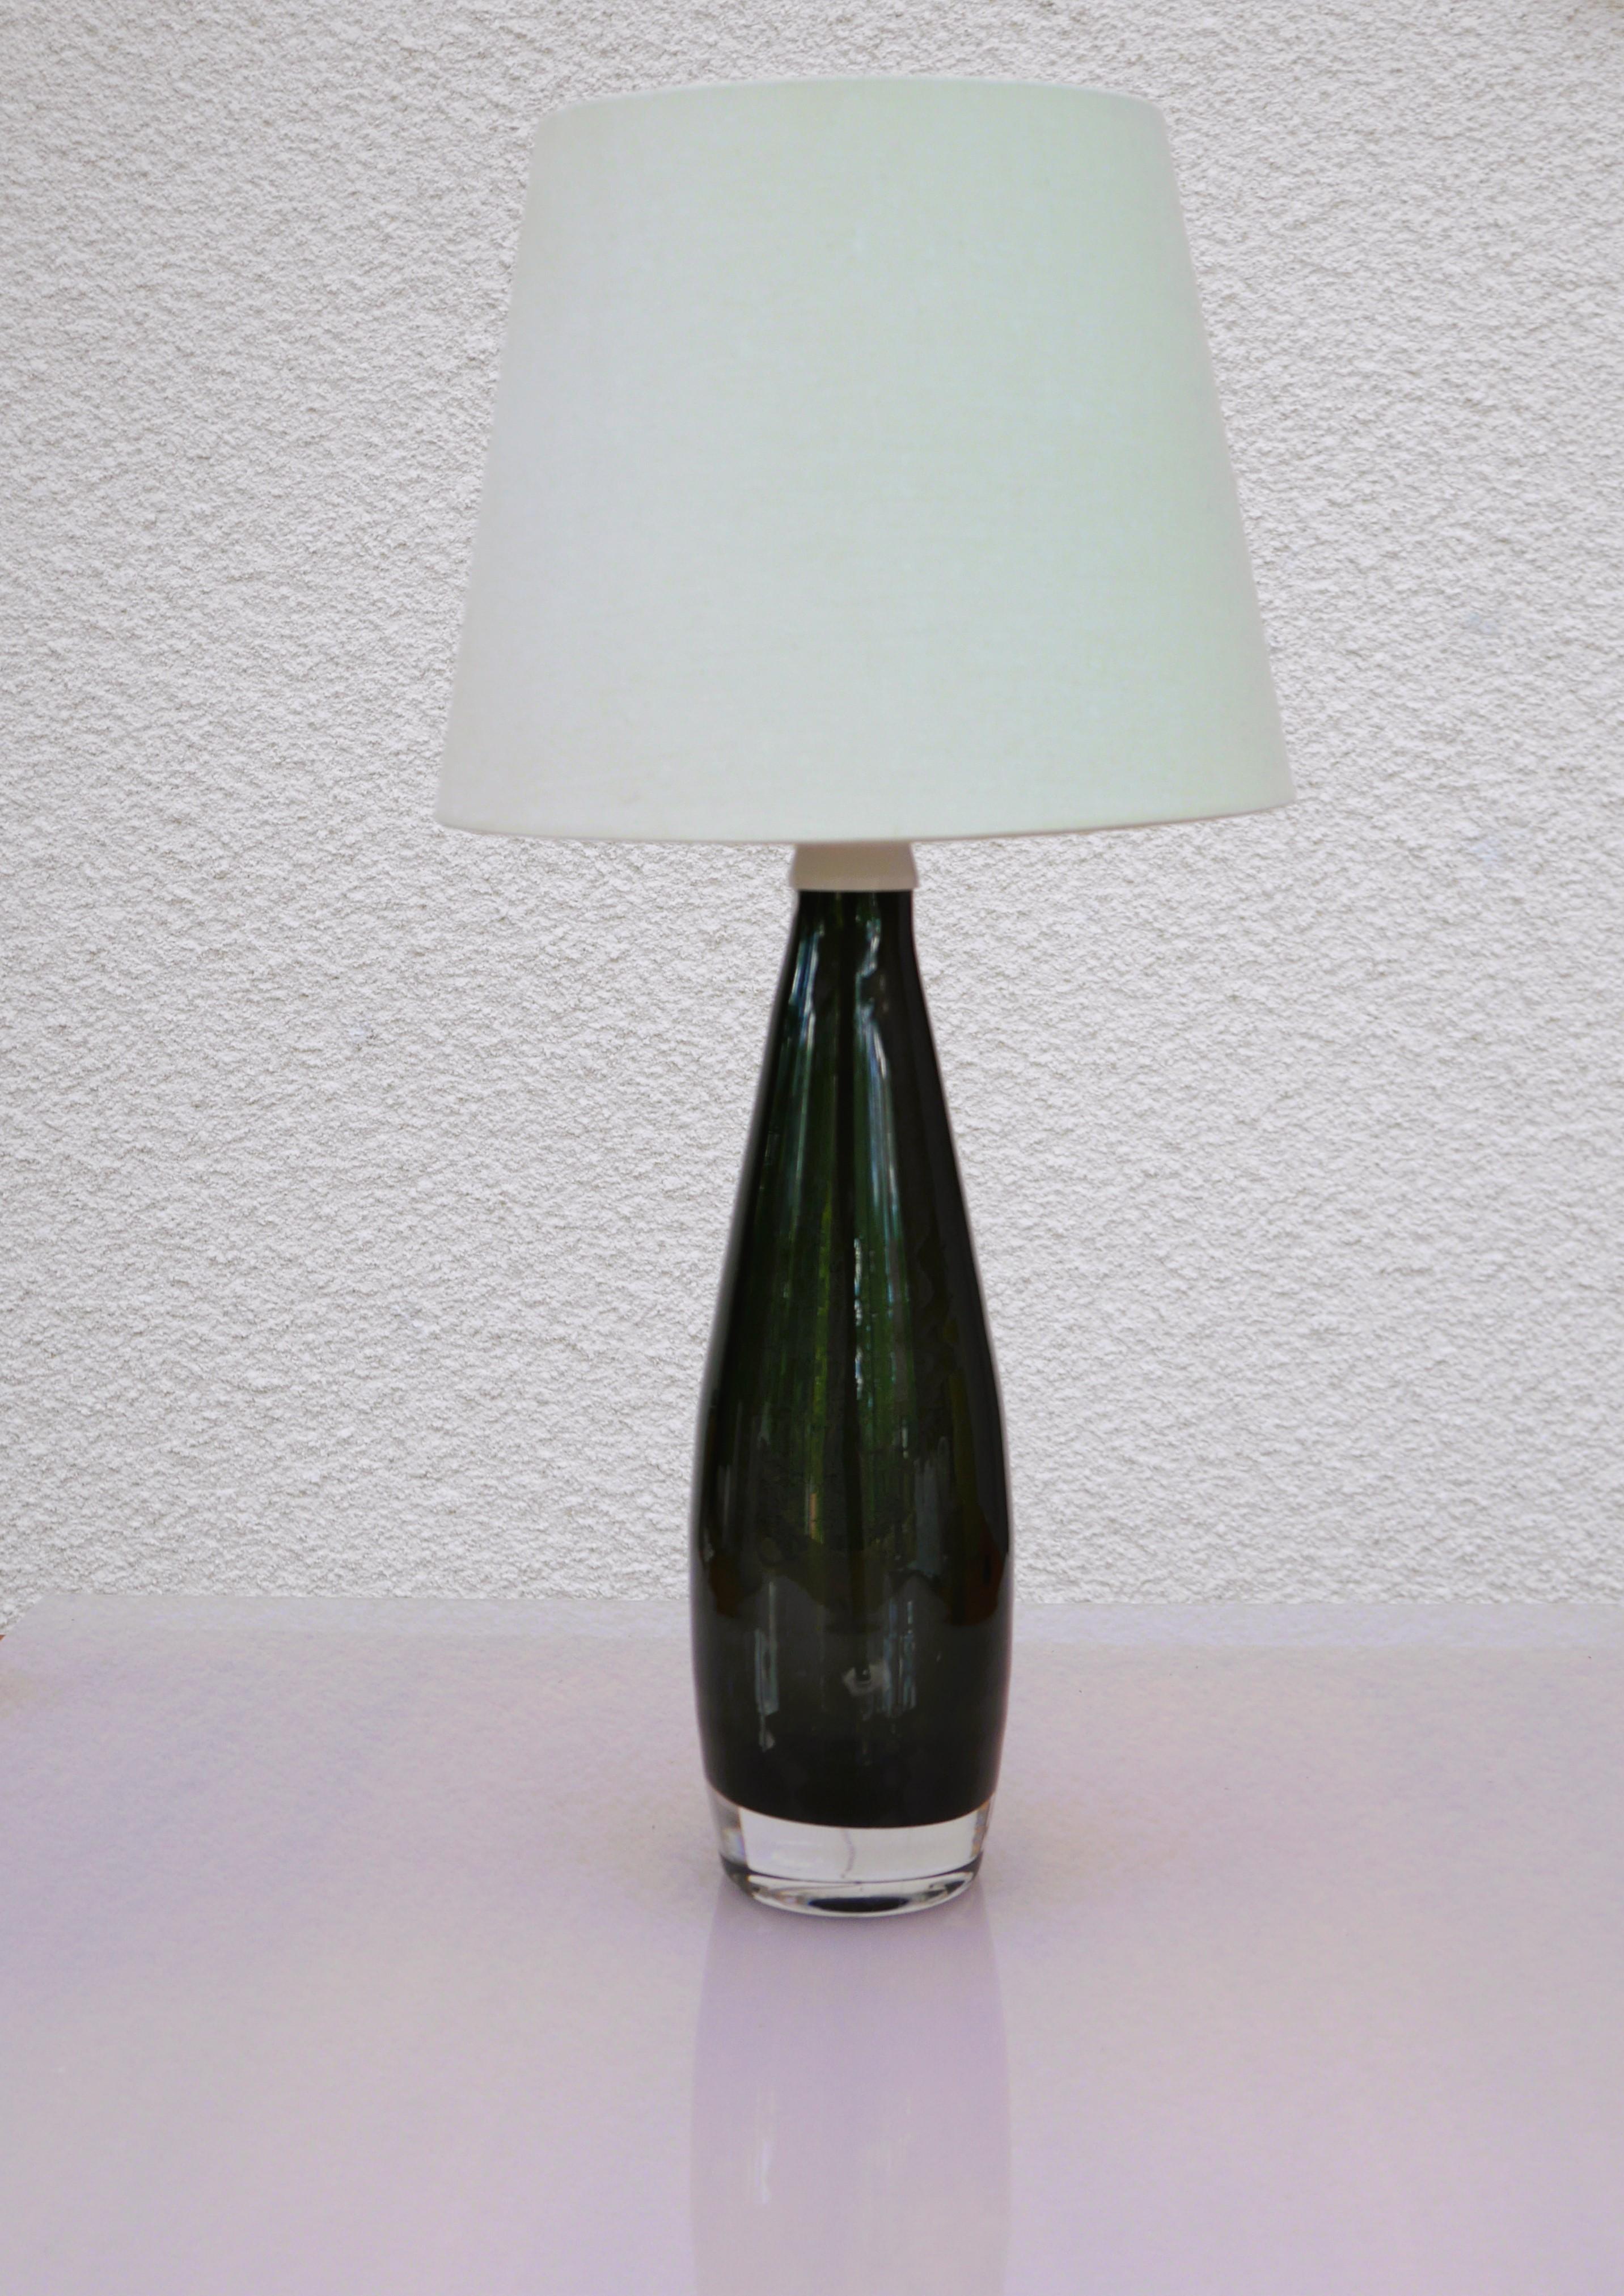 Mid-century Modern sommerso lamp base made and signed by Ove Sandberg Kosta In Good Condition For Sale In Skarpnäck, SE